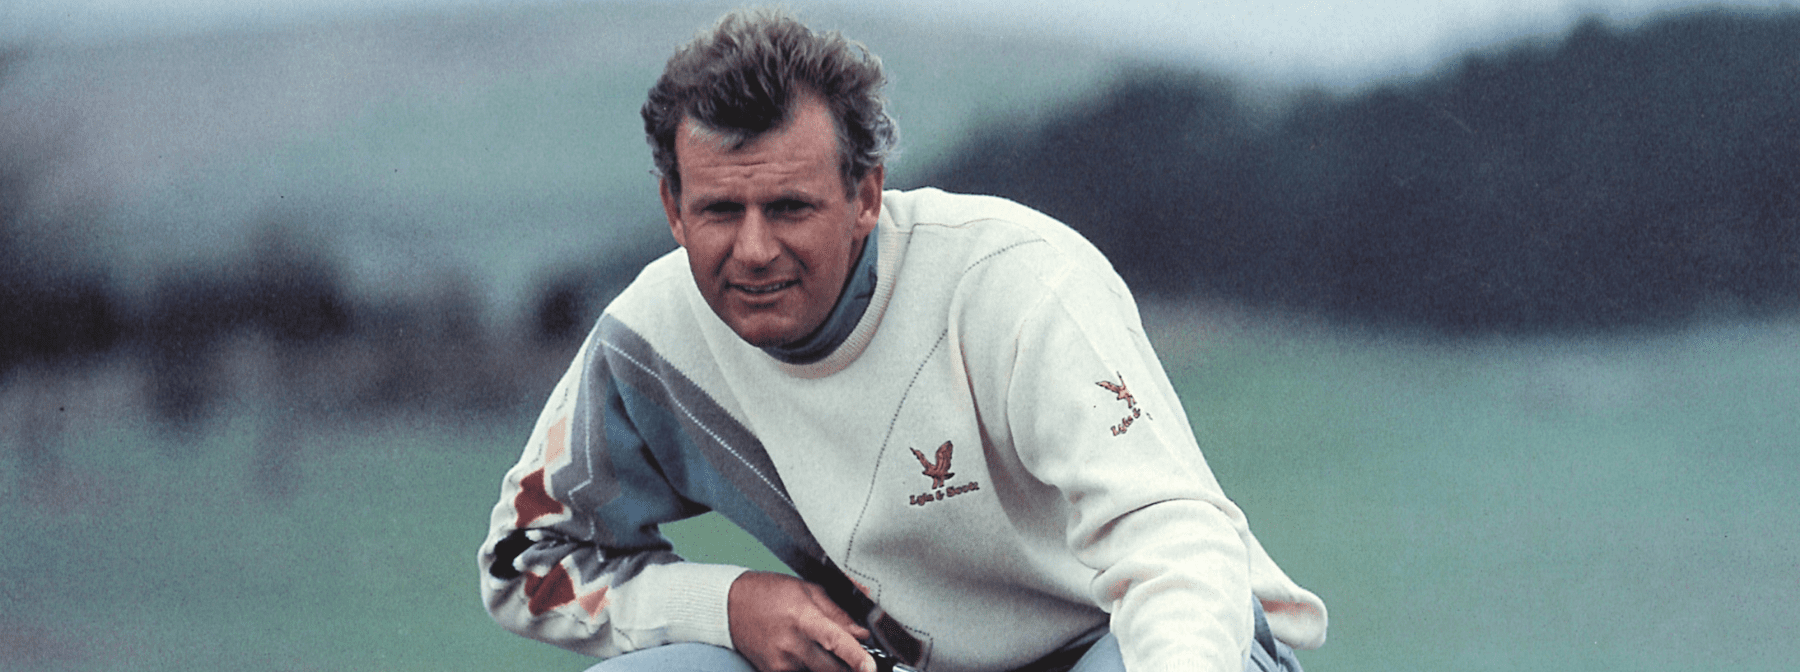 Sandy Lyle, wearing Lyle & Scott, weighs up a shot at the 1992 Open Championship